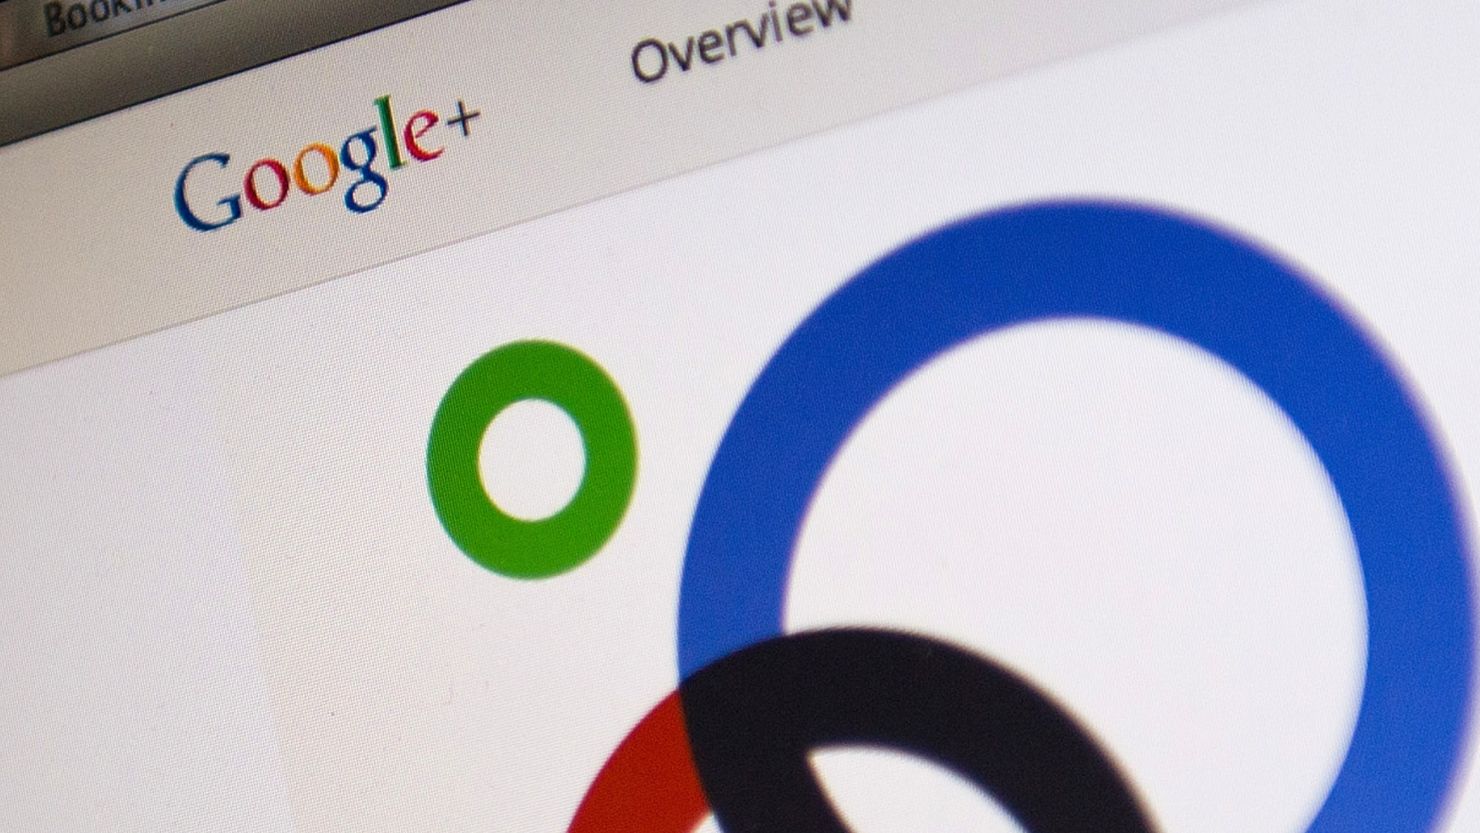 The staffers behind Google+ say that it shouldn't be referred to as a social network.